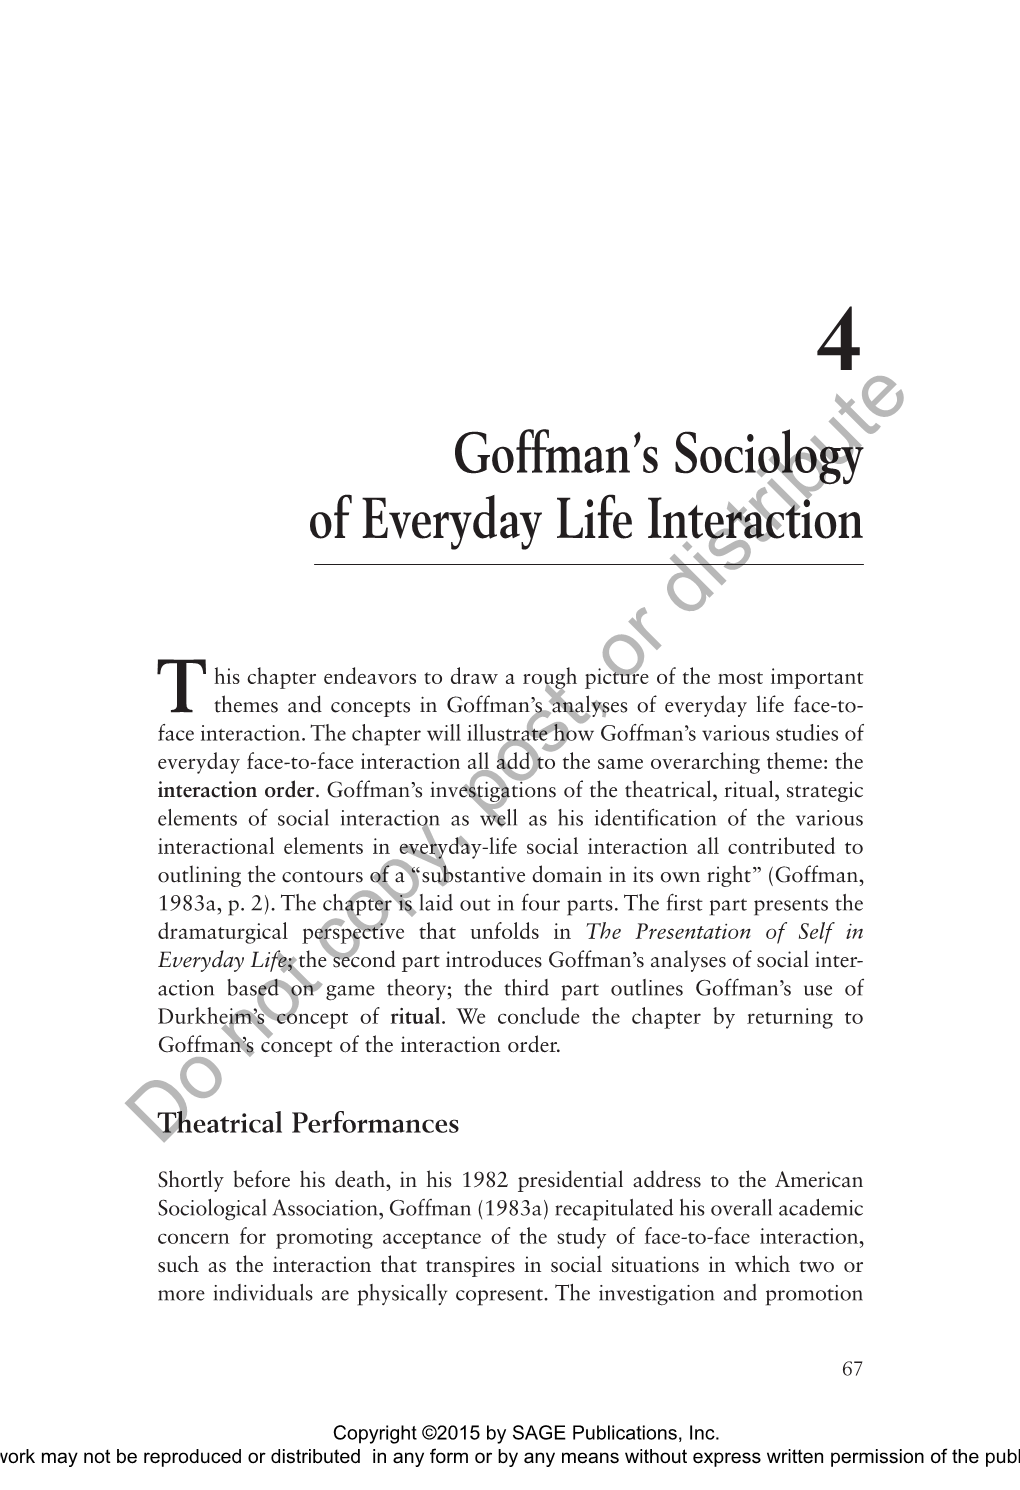 Goffman's Sociology of Everyday Life Interaction